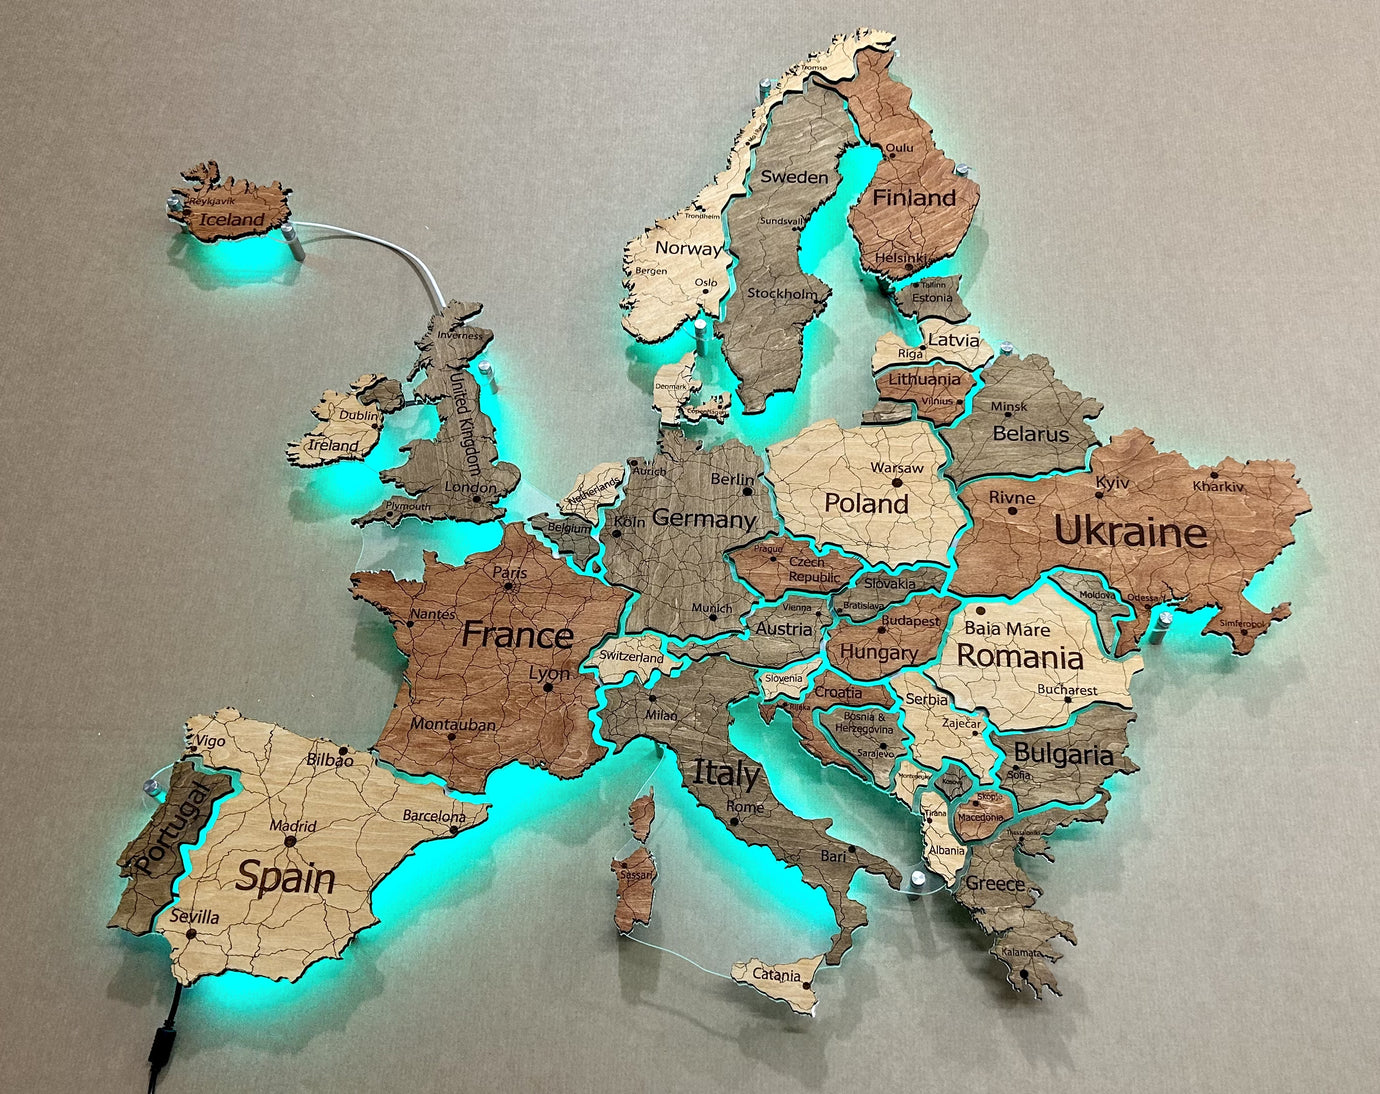 Europe LED RGB map on acrylic glass with backlighting between countries color Warm